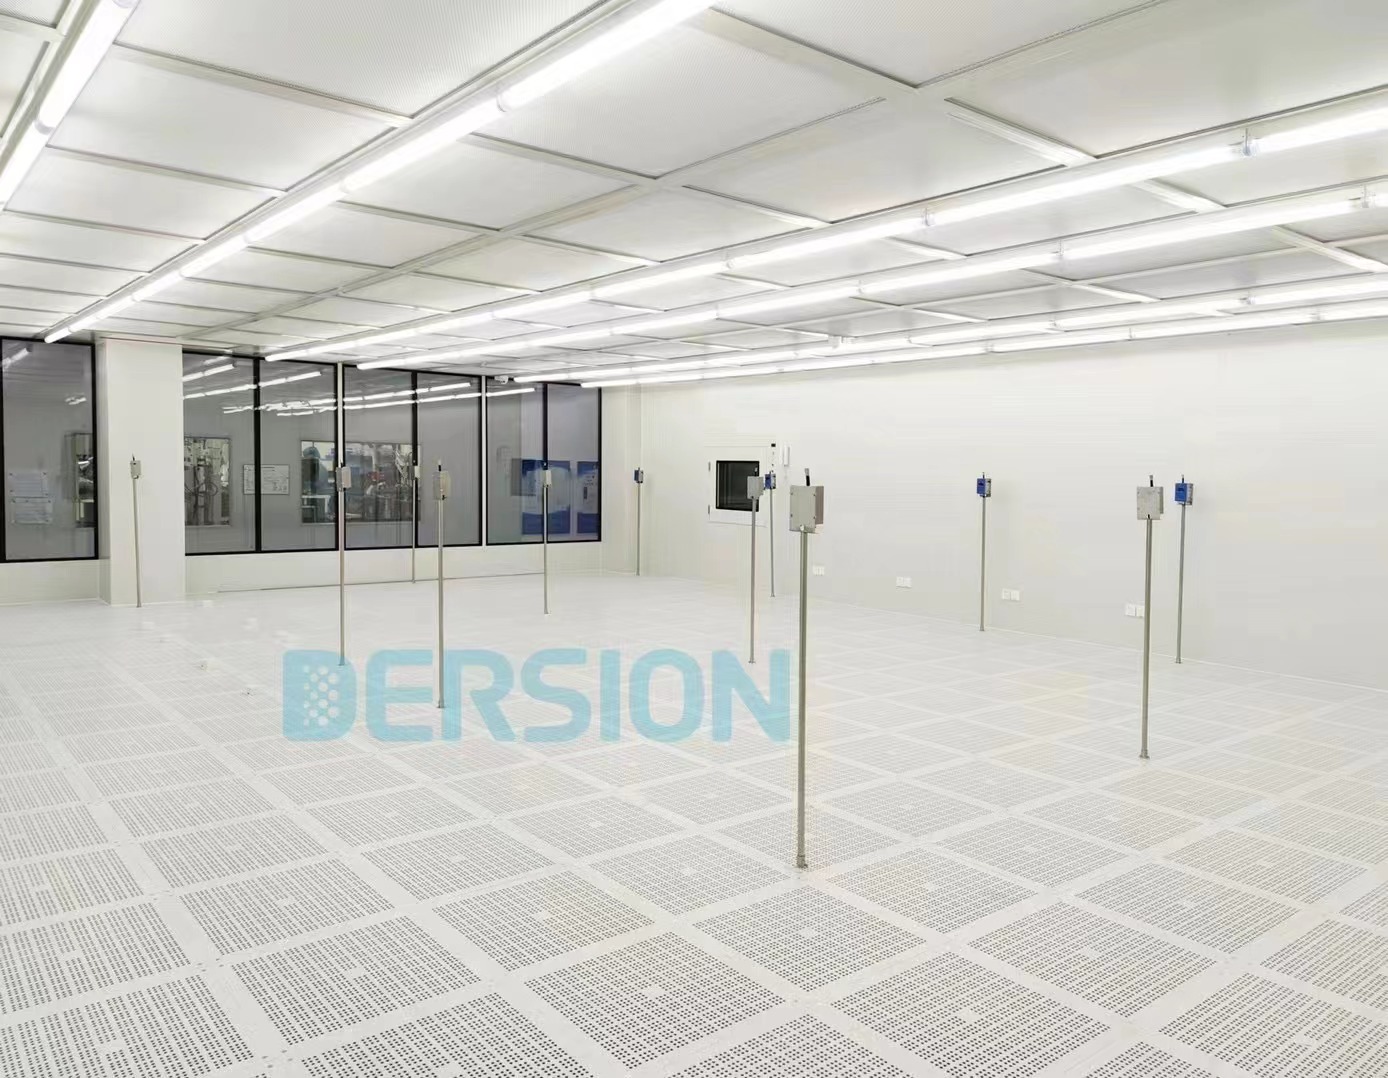 Common causes of dust production in clean rooms